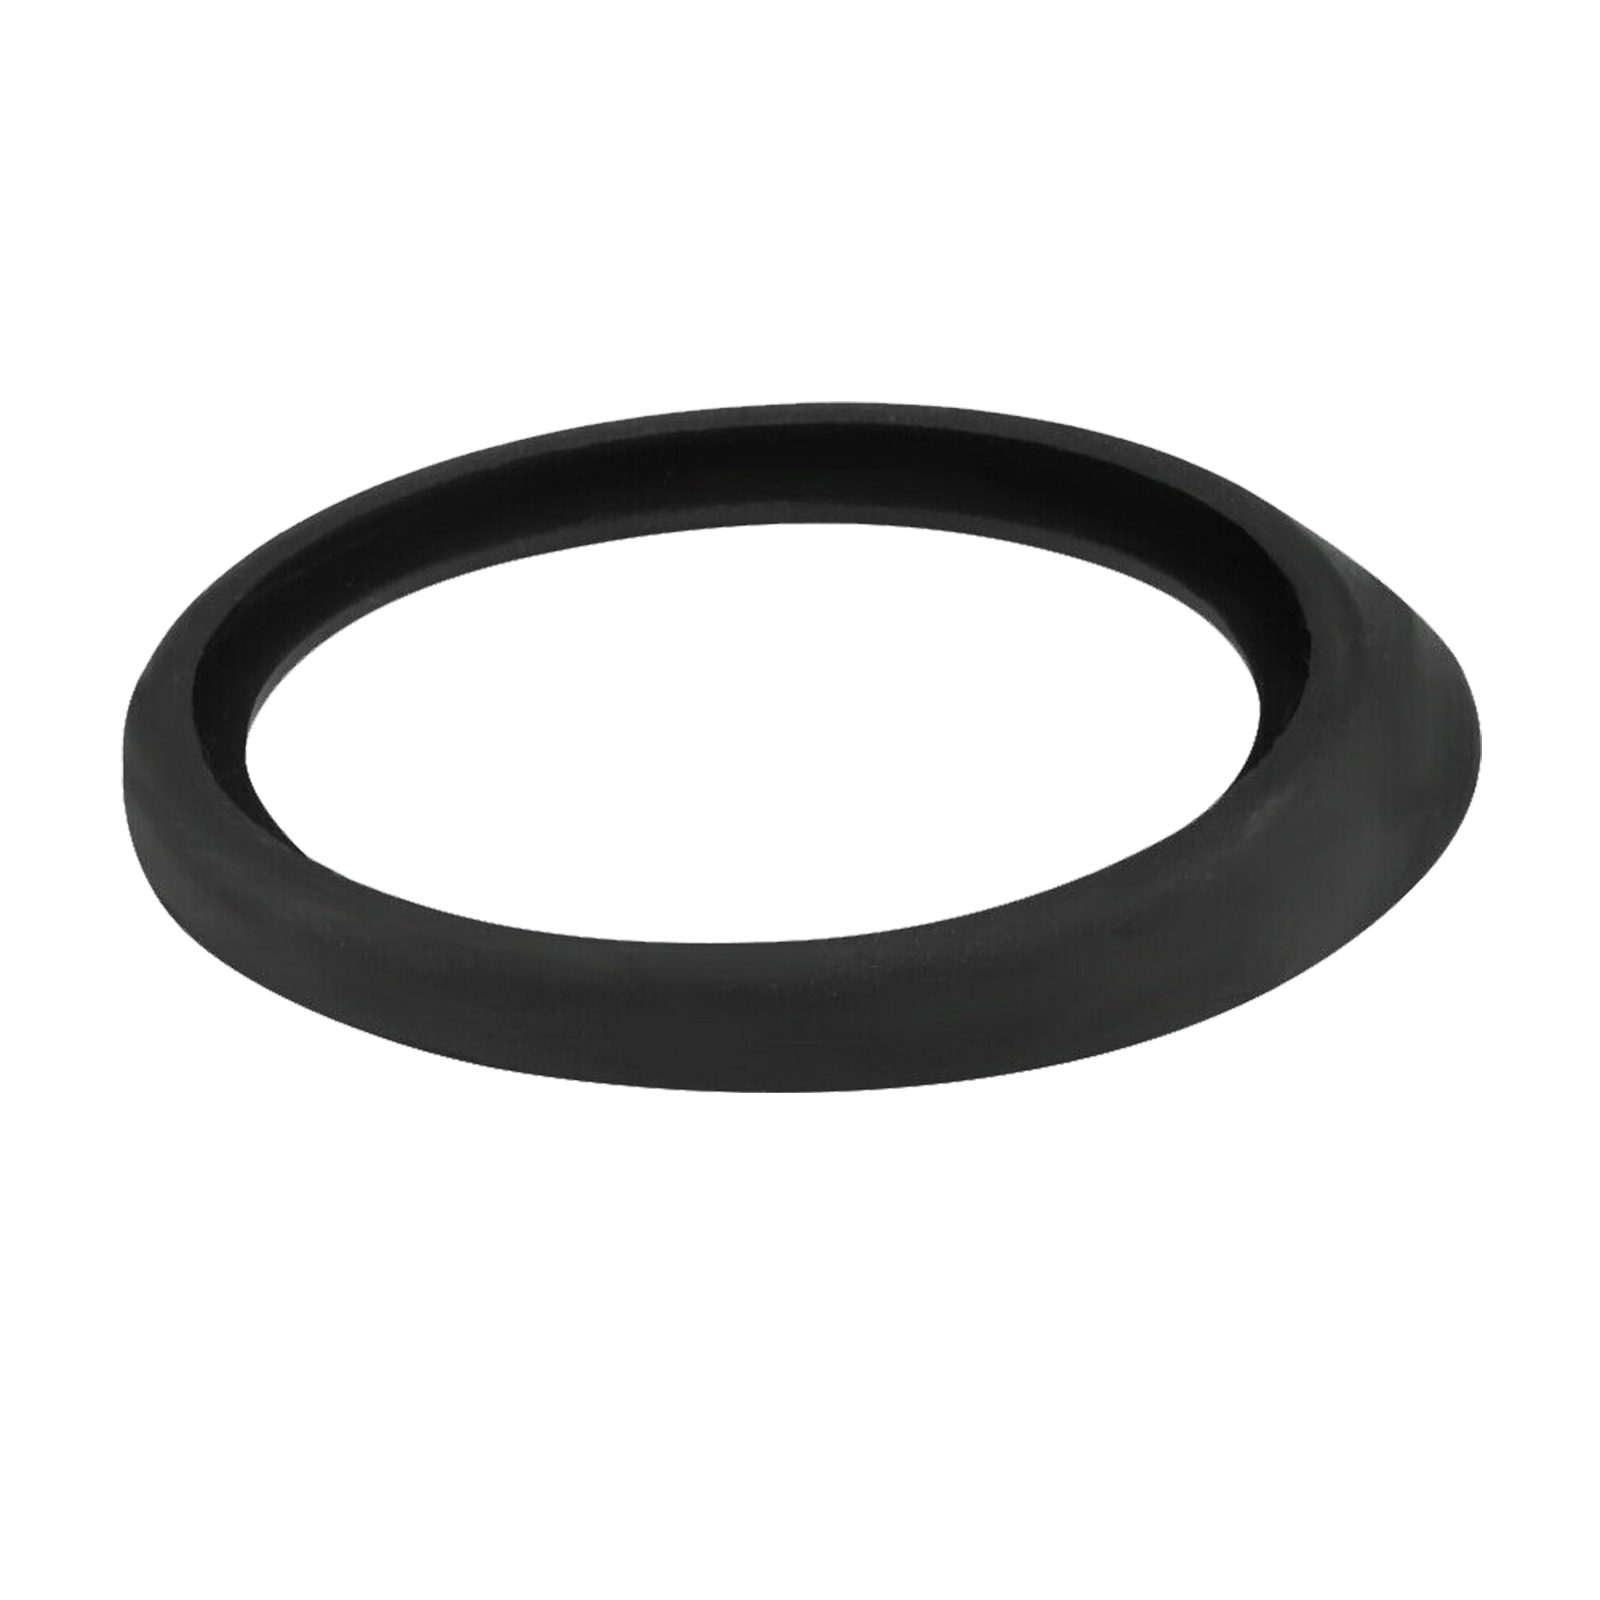 Vauxhall Opel Corsa Vita C Roof Aerial Antenna Rubber Gasket Seal SMALL BASE